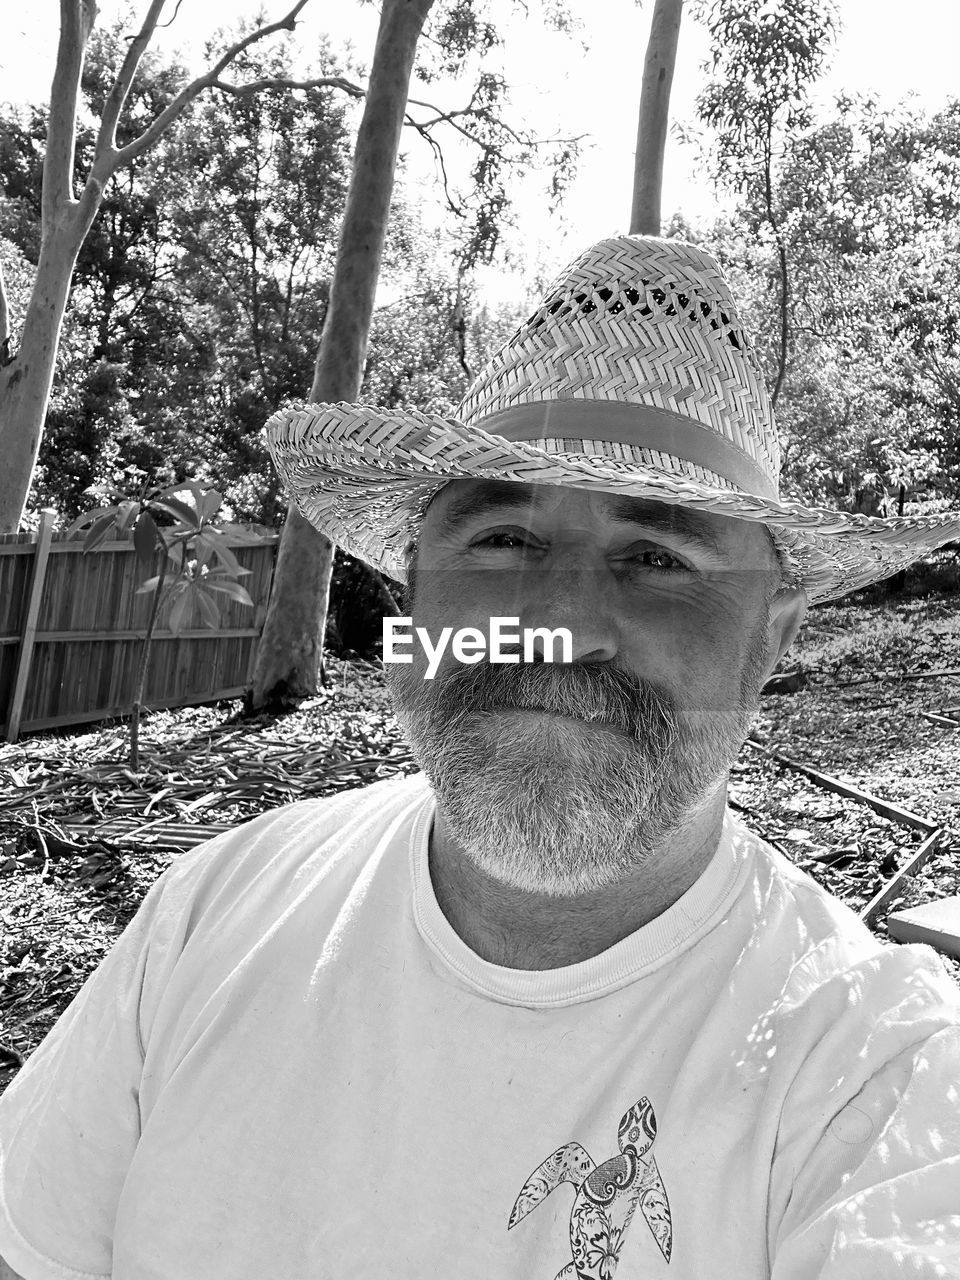 portrait, one person, front view, adult, men, looking at camera, headshot, day, hat, black and white, tree, lifestyles, white, facial hair, person, leisure activity, beard, casual clothing, plant, nature, monochrome photography, human face, mature adult, clothing, outdoors, monochrome, smiling, standing, sun hat